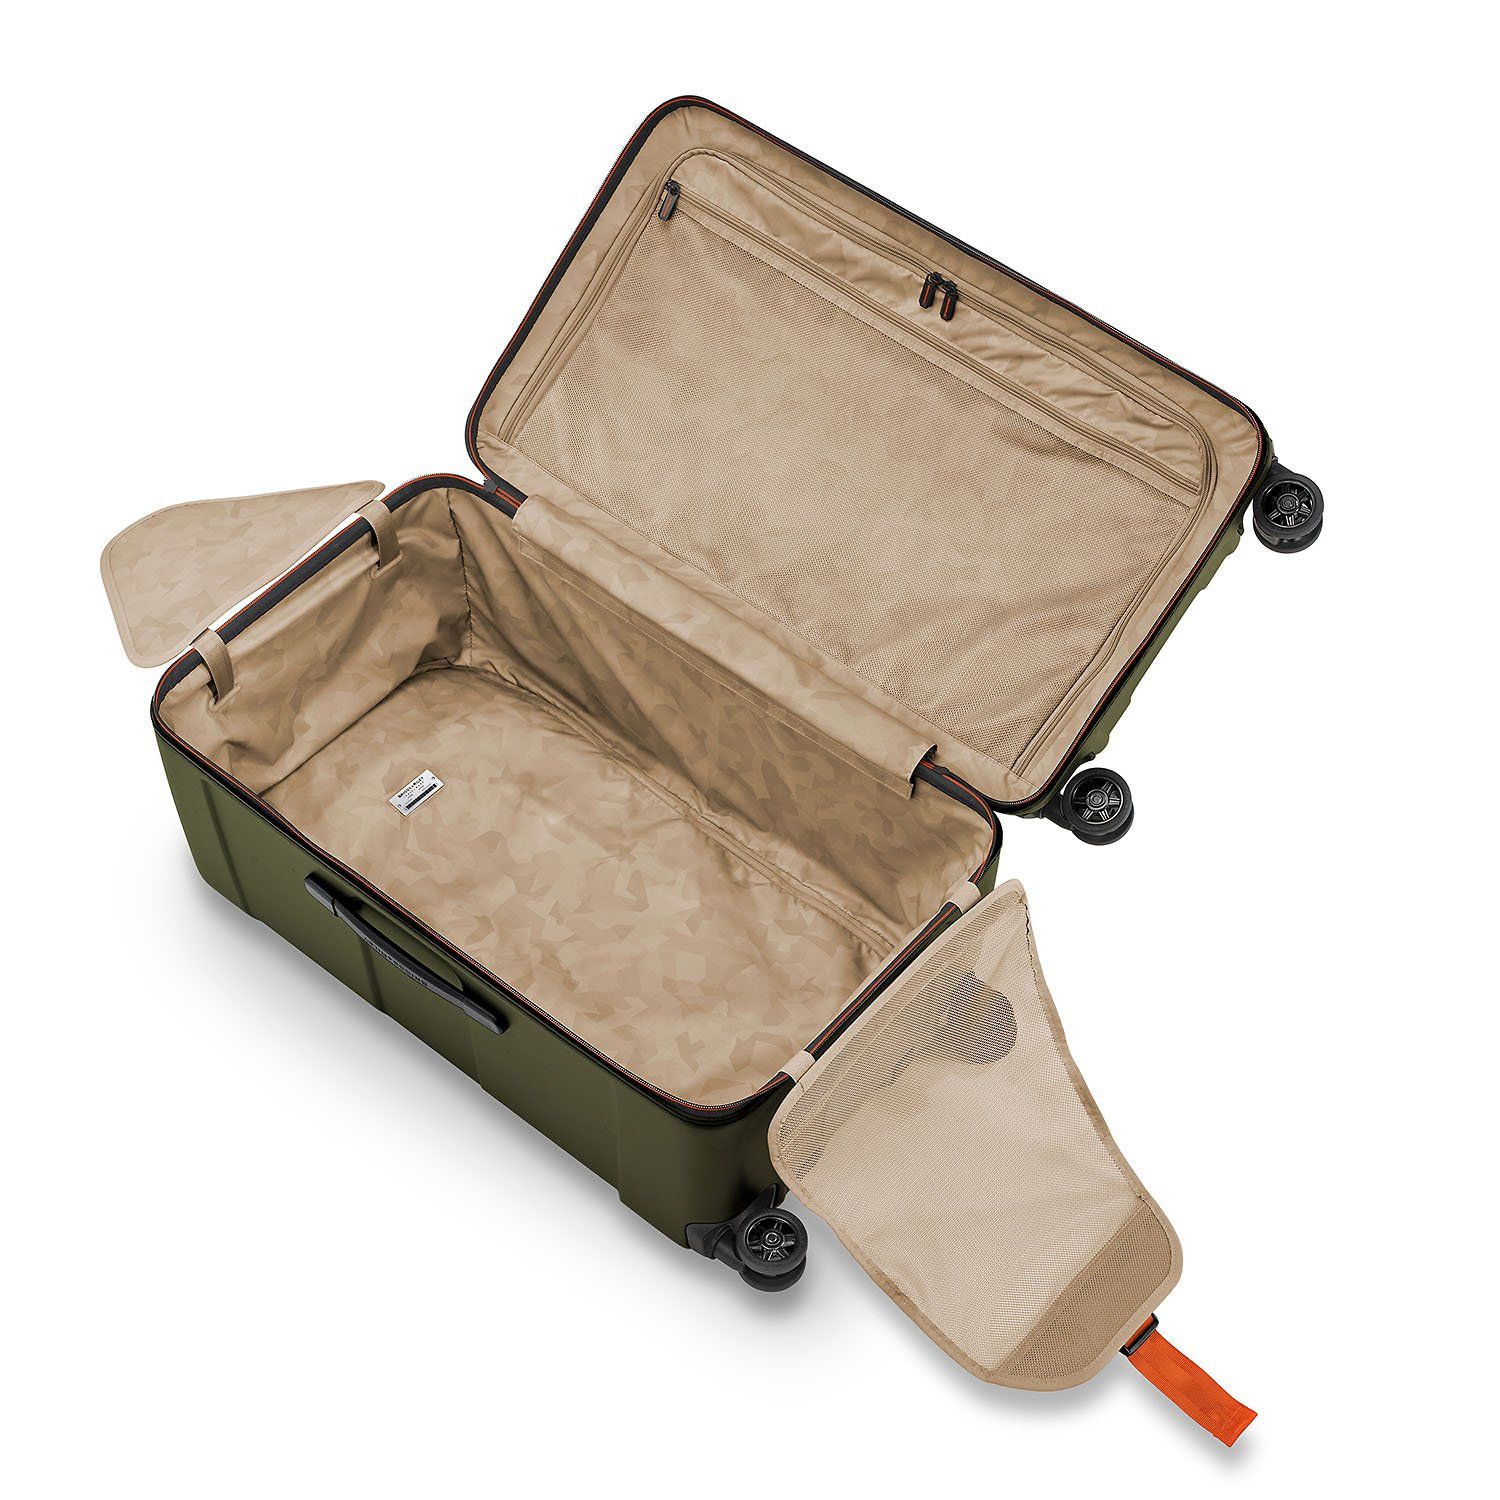 Lighter than a trunk, bigger than a suitcase -- you get the best of both worlds with the Torq Medium Trunk Spinner. The rugged, resilient hardside case means ultimate protection for all your belongings. Key features include: Outsider® handle provides greater interior capacity and a smooth surface for packing so clothes arrive wrinkle-free. Monogrammable leather nameplate to customise with your initials; easily removable and replaceable. Cavernous main compartment accommodates a large variety of bulky clothing or odd-shaped items; lid pocket can either be used as a suiter or as additional packing space. 80/20 lid opening allows bag to be packed like a traditional suitcase on a luggage rack. 3-layer, 100% virgin Makrolon® polycarbonate material is high-strength, lightweight, and provides elasticity and resiliency.